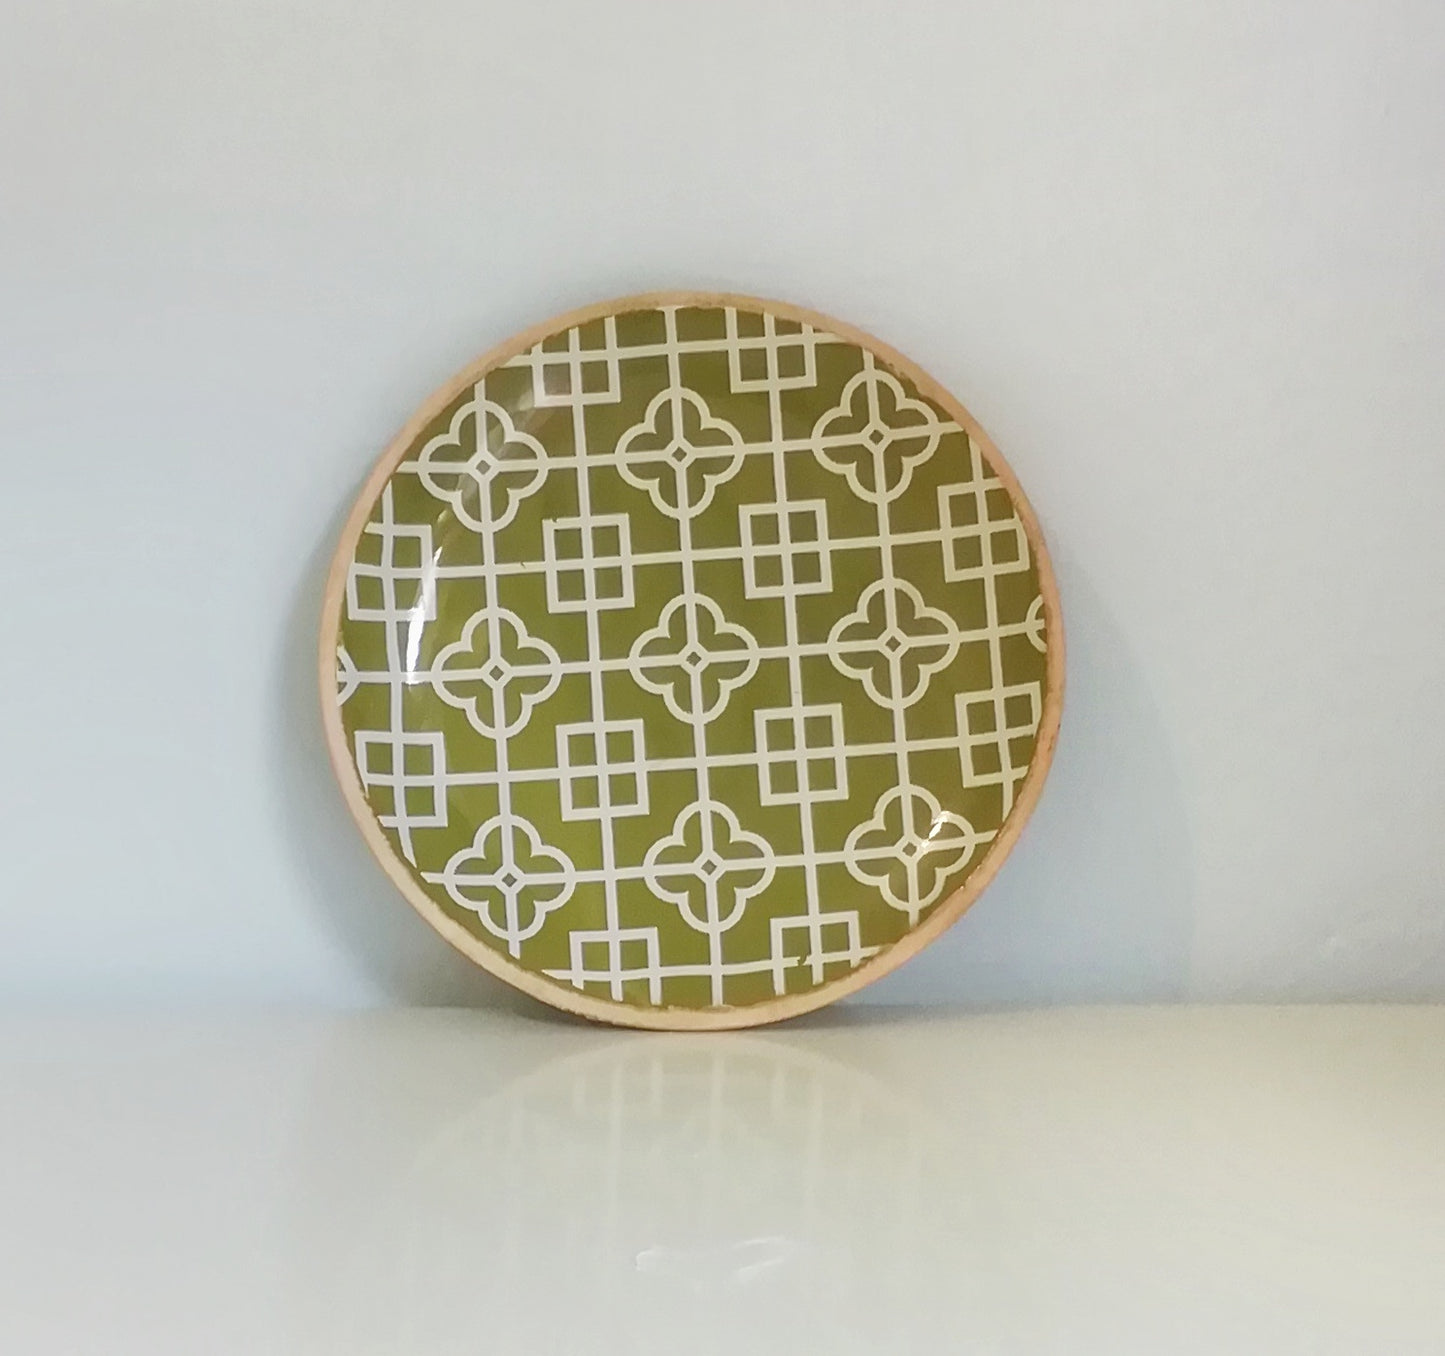 Round Display Tray With Moroccan Tile Design, Decorative Ceramic Platter, Two Piece Set